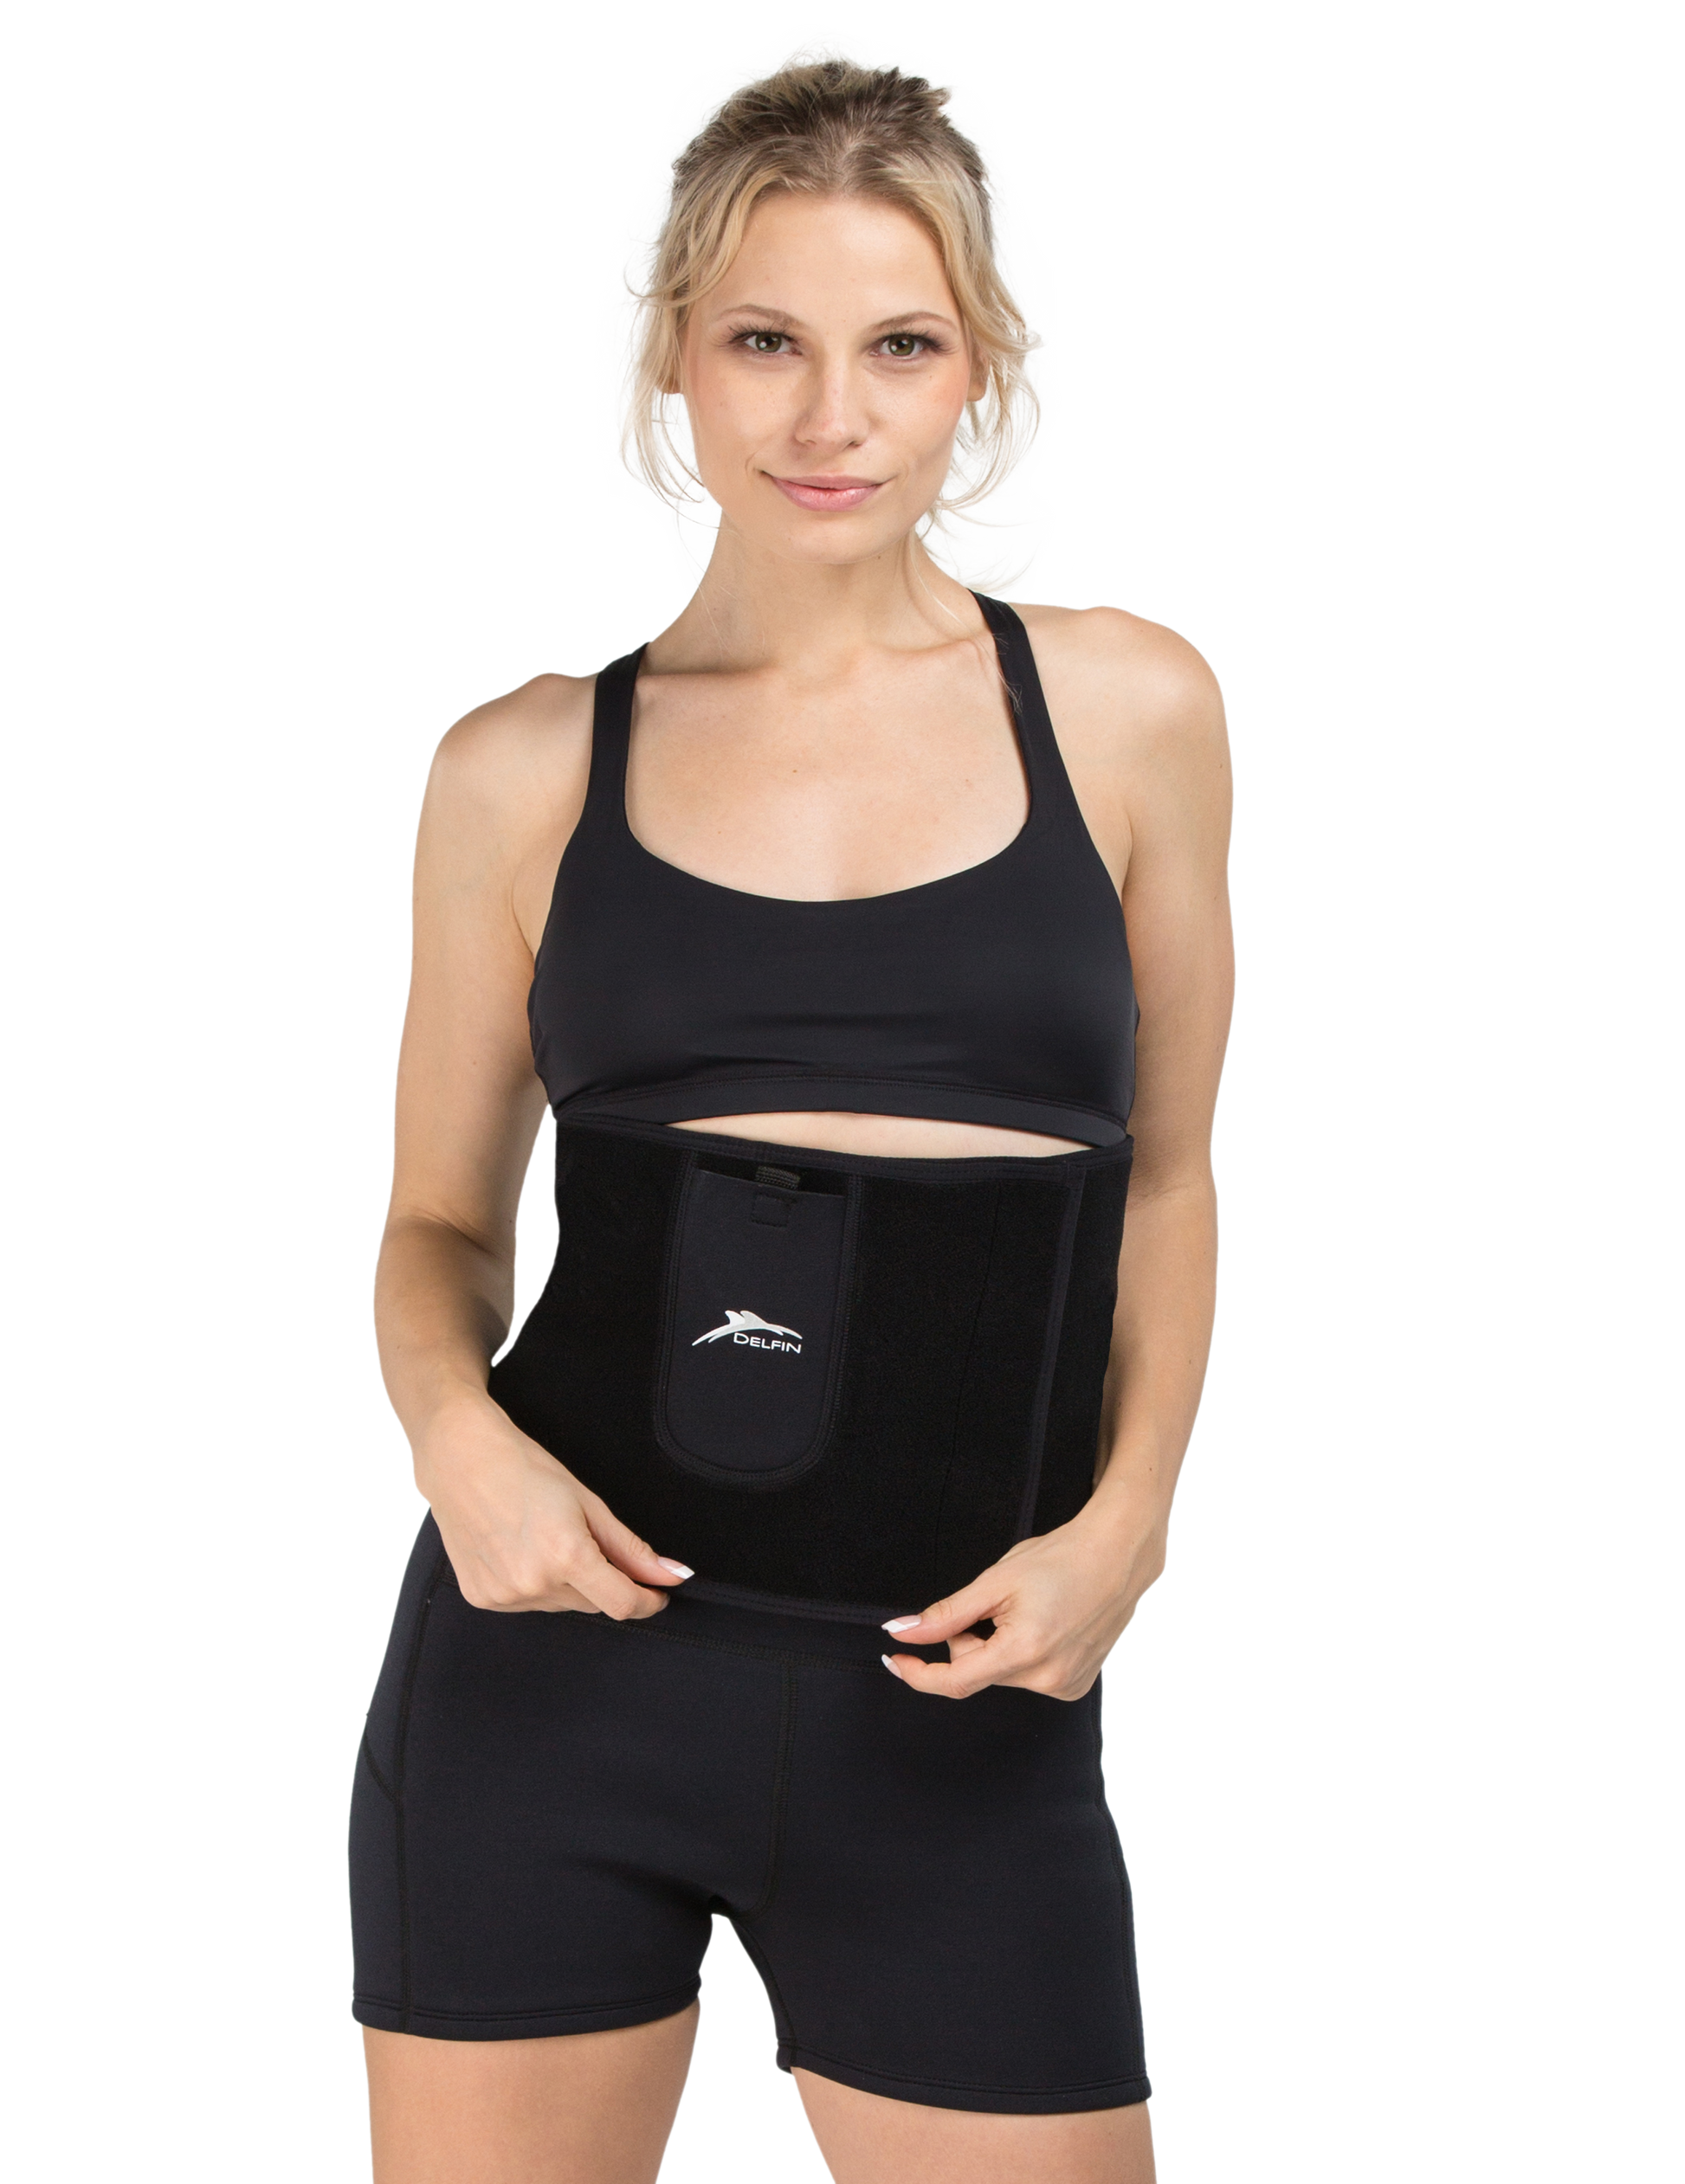 Women's Slimming Tummy Wrap Belt in Central Division - Tools